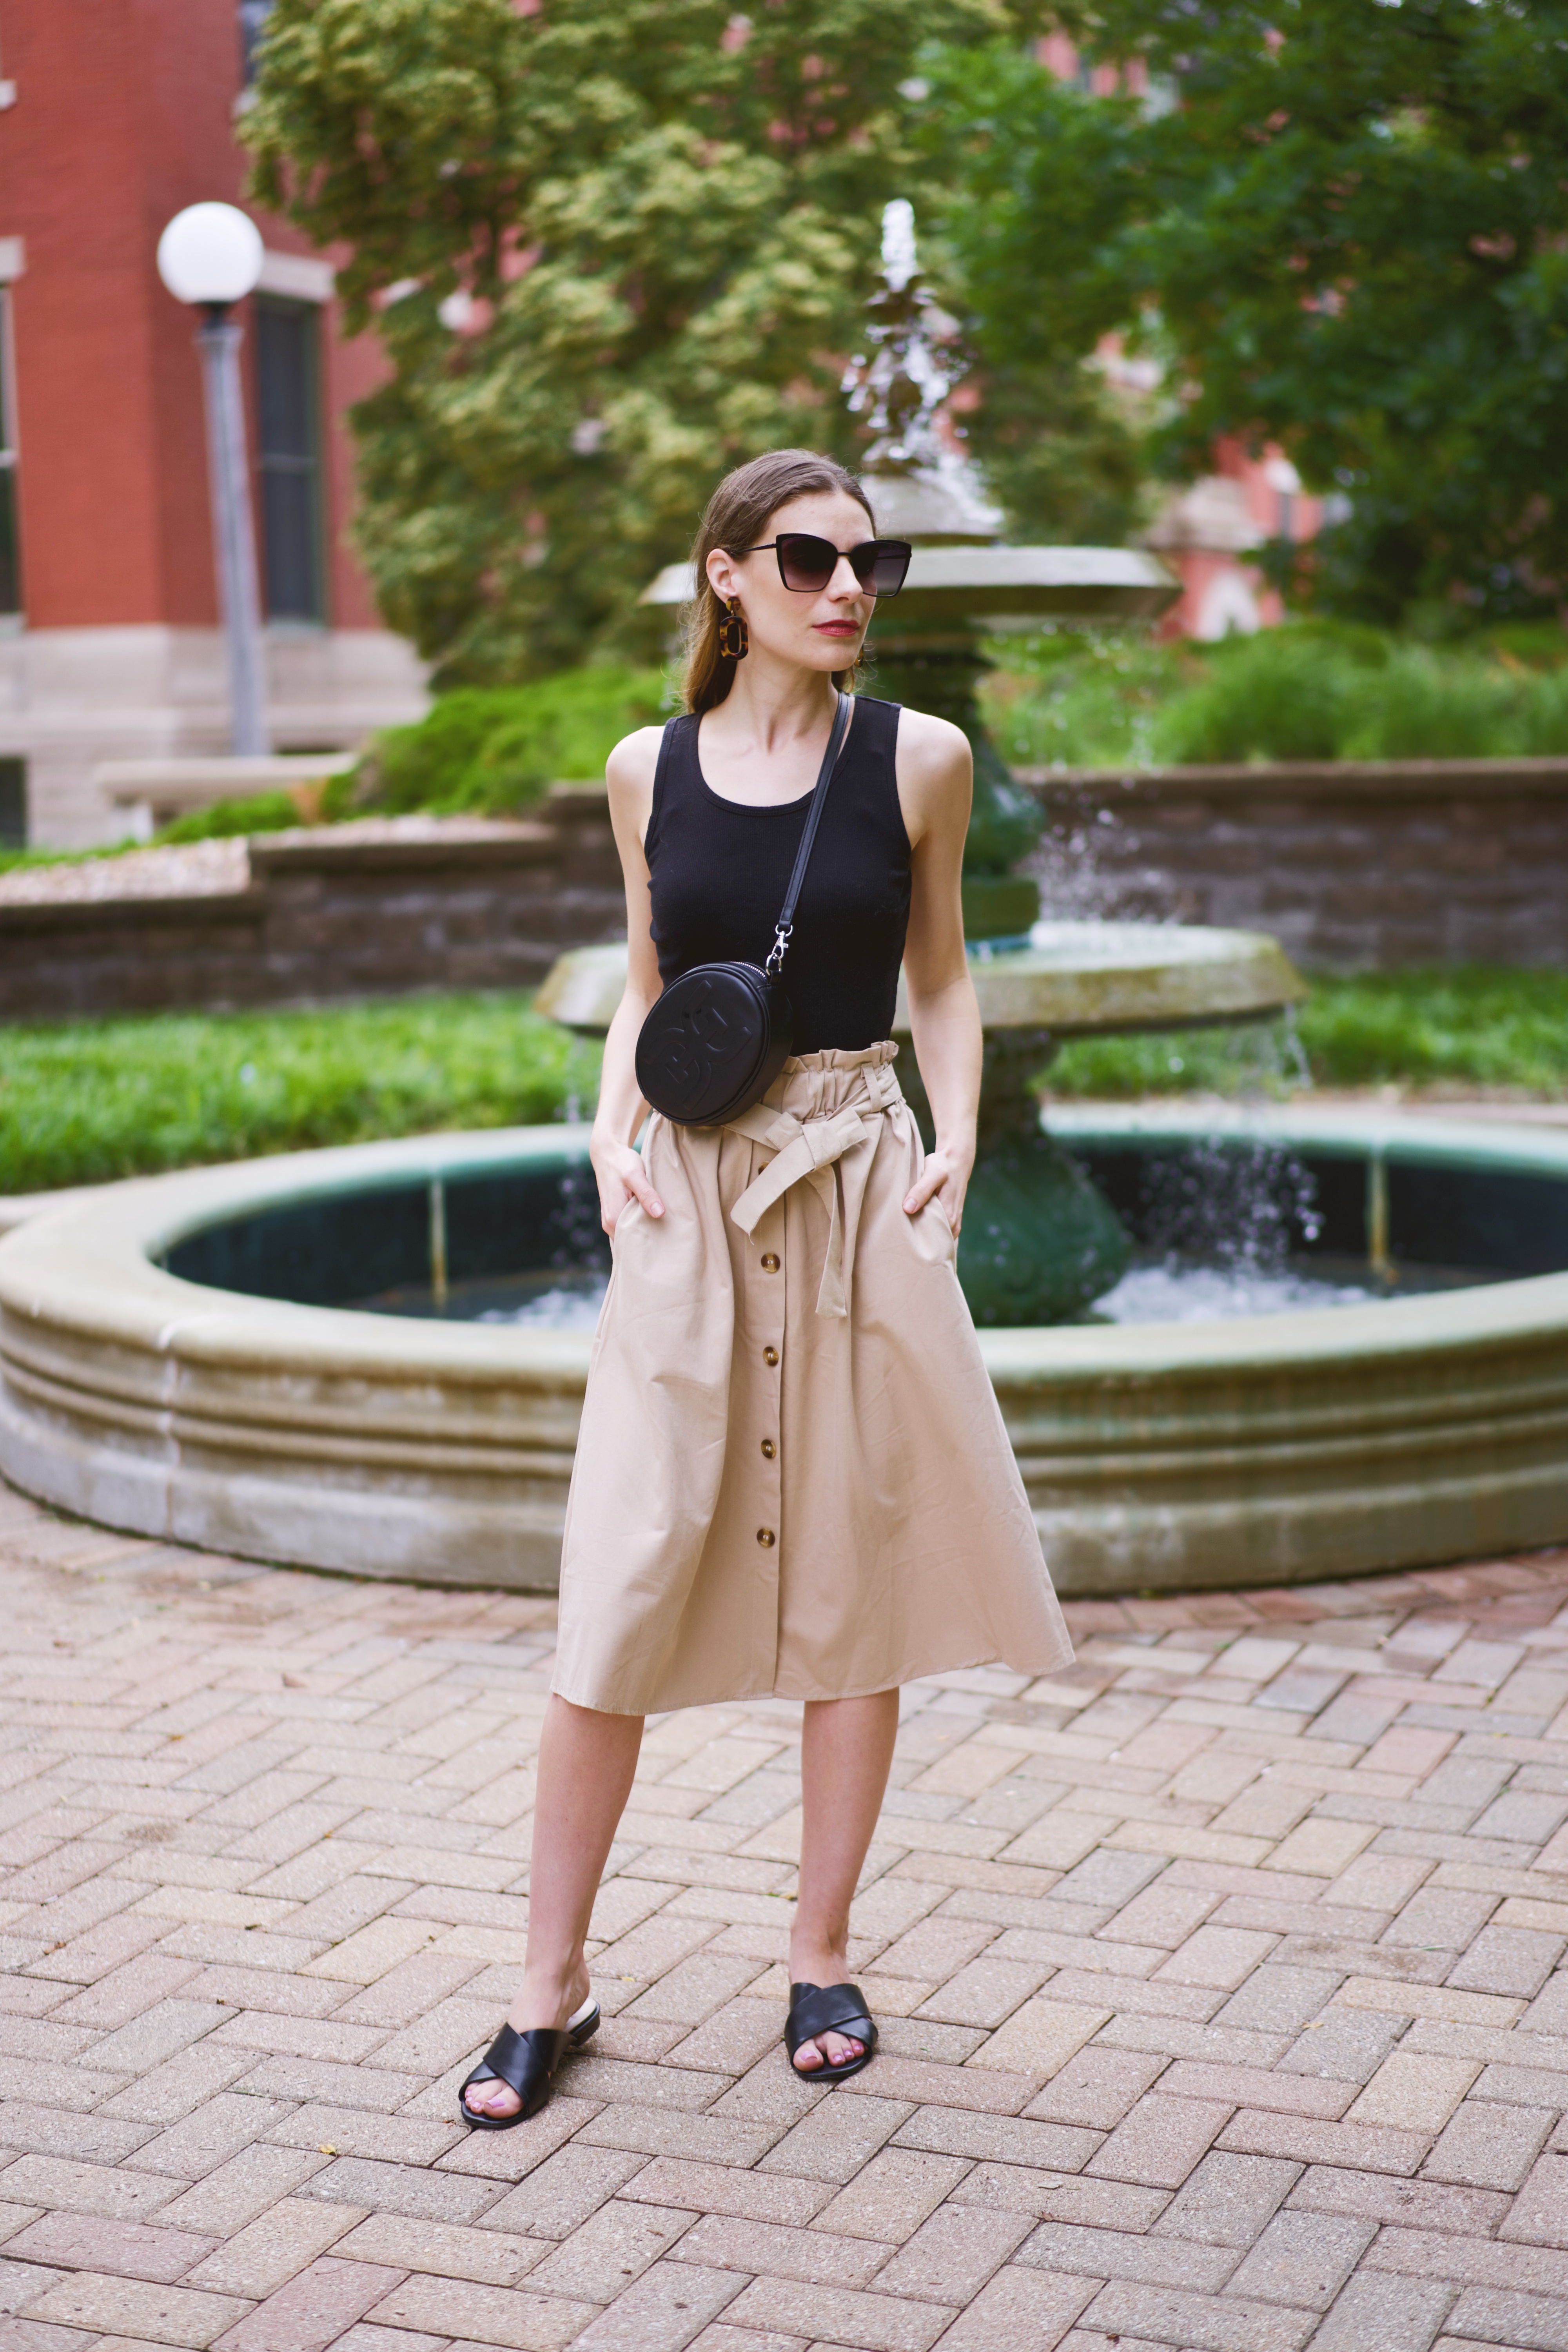 How To Wear A Paper Bag Skirt - The Dark Plum 4 easy tips